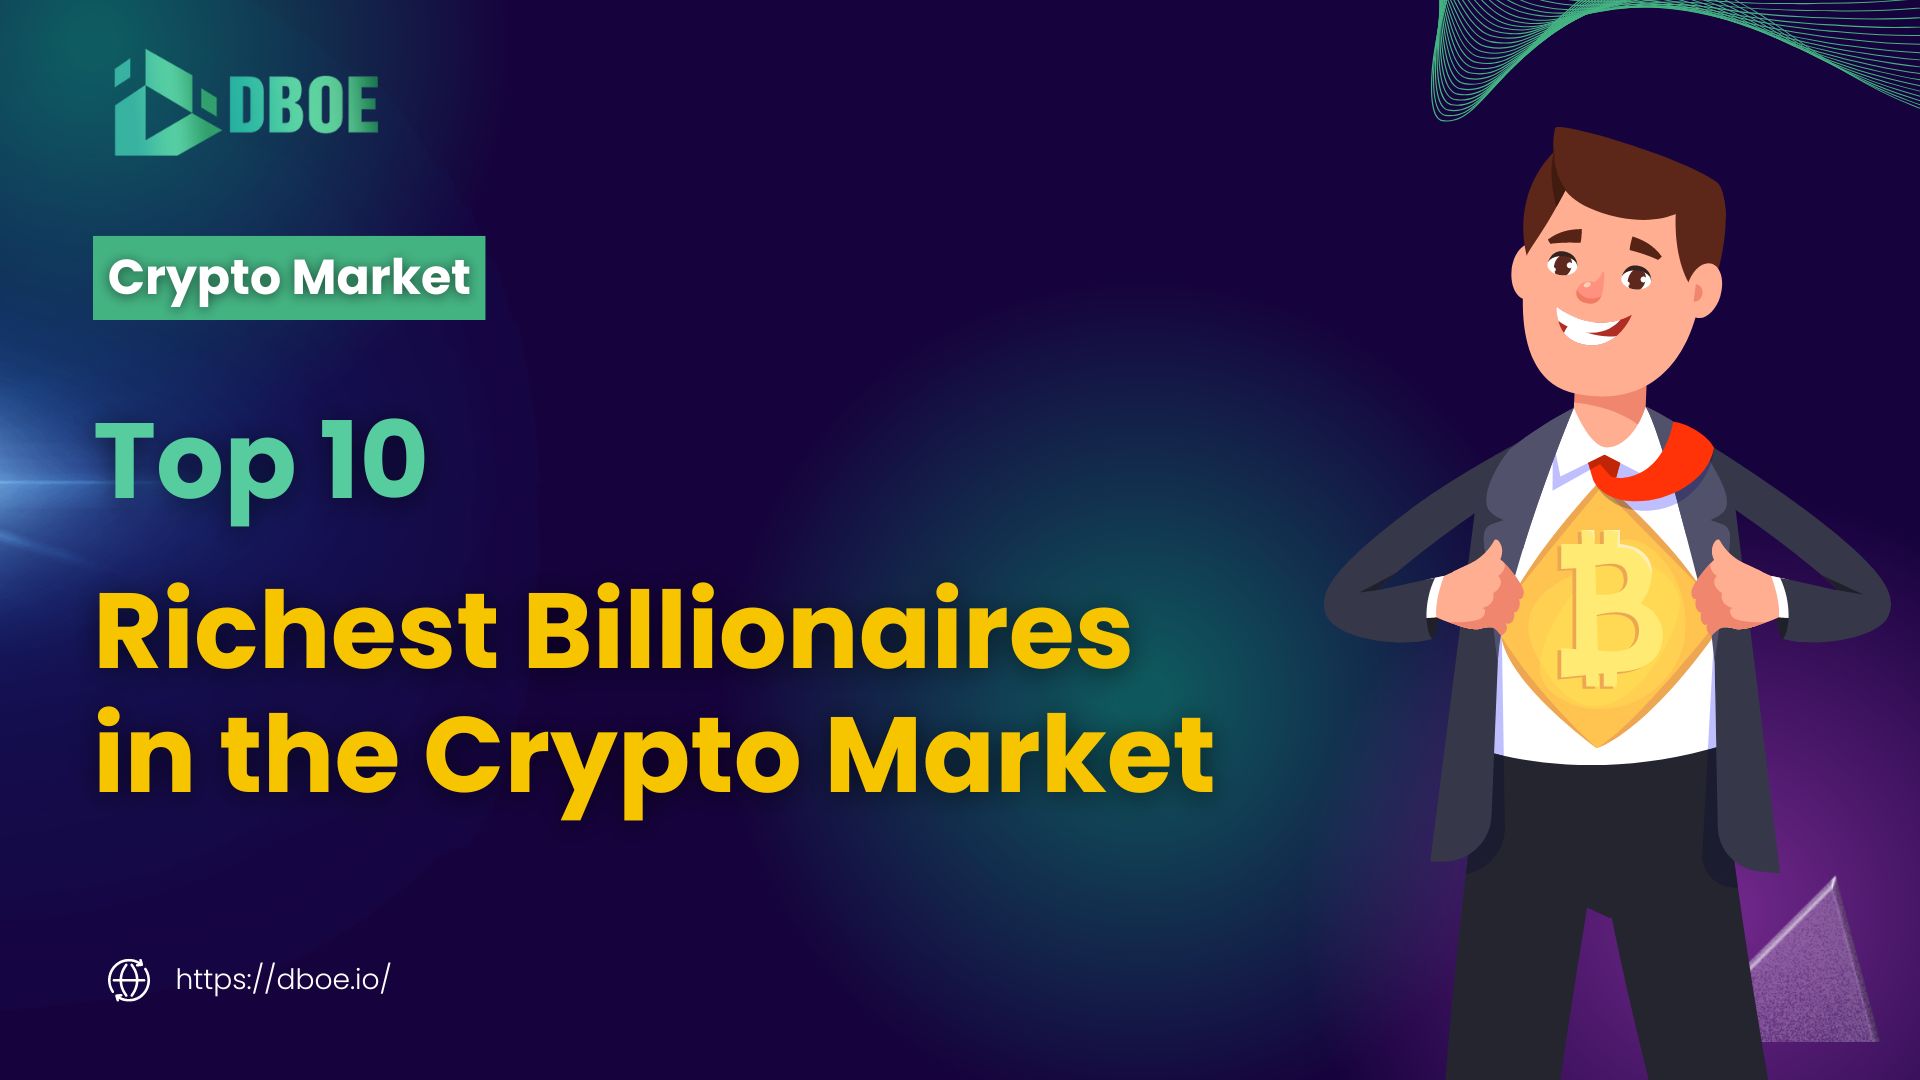 Top 10 Richest Billionaires in the Crypto Market